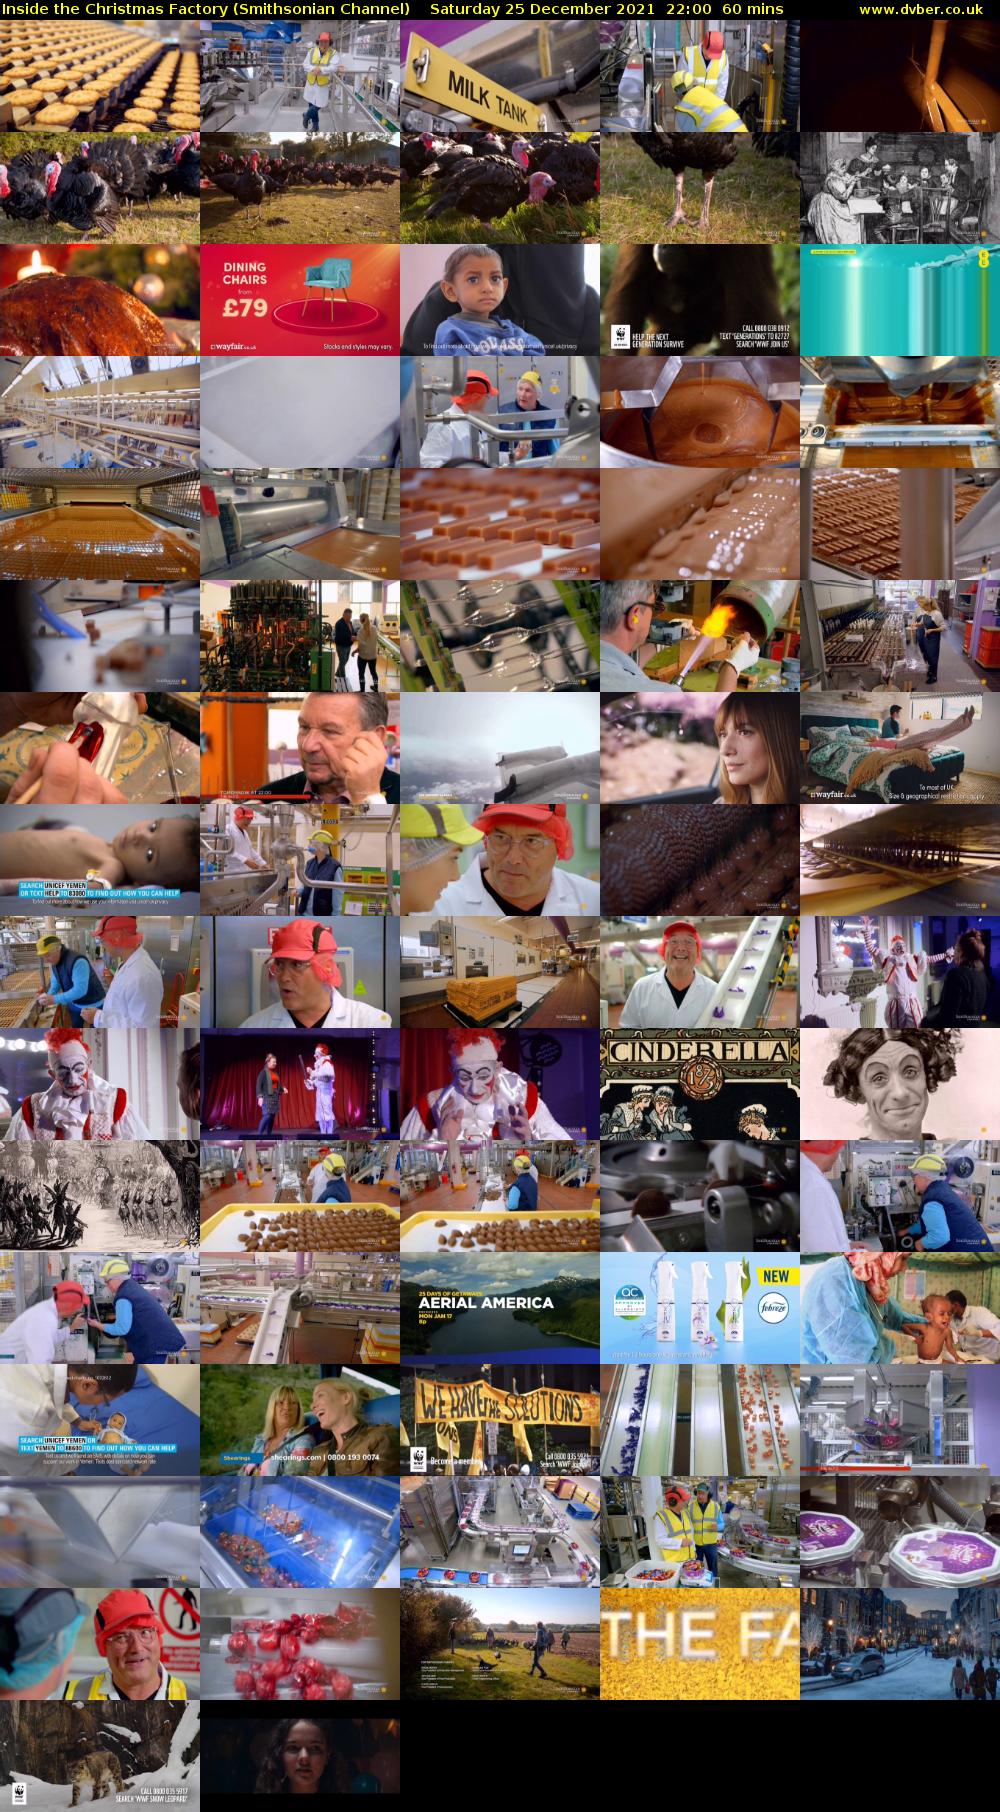 Inside The Christmas Factory (Smithsonian Channel) Saturday 25 December 2021 22:00 - 23:00